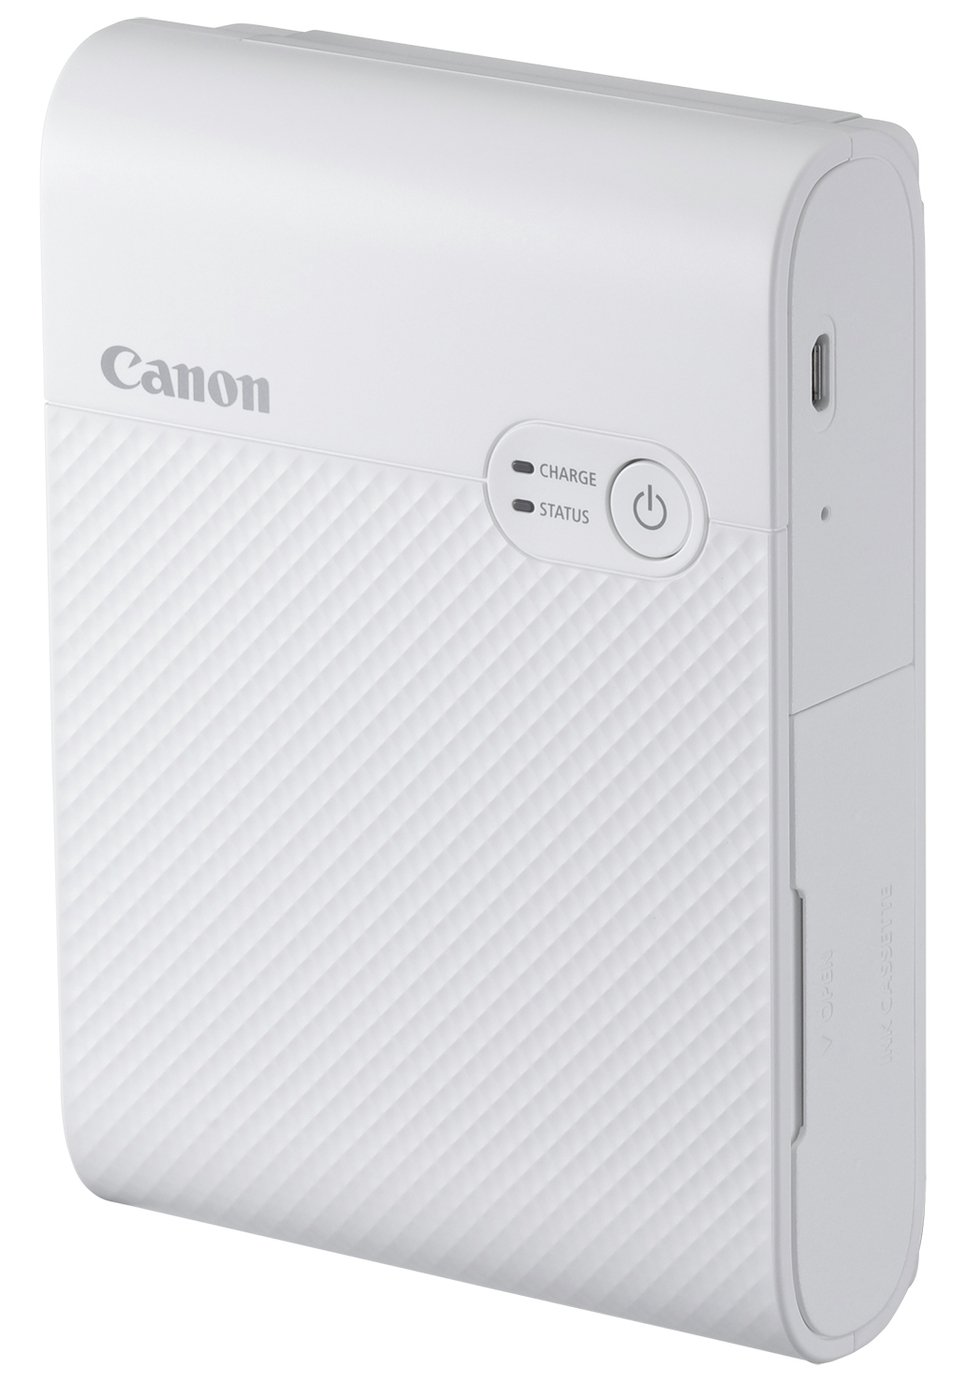 Canon Selphy Square QX10 Printer Review